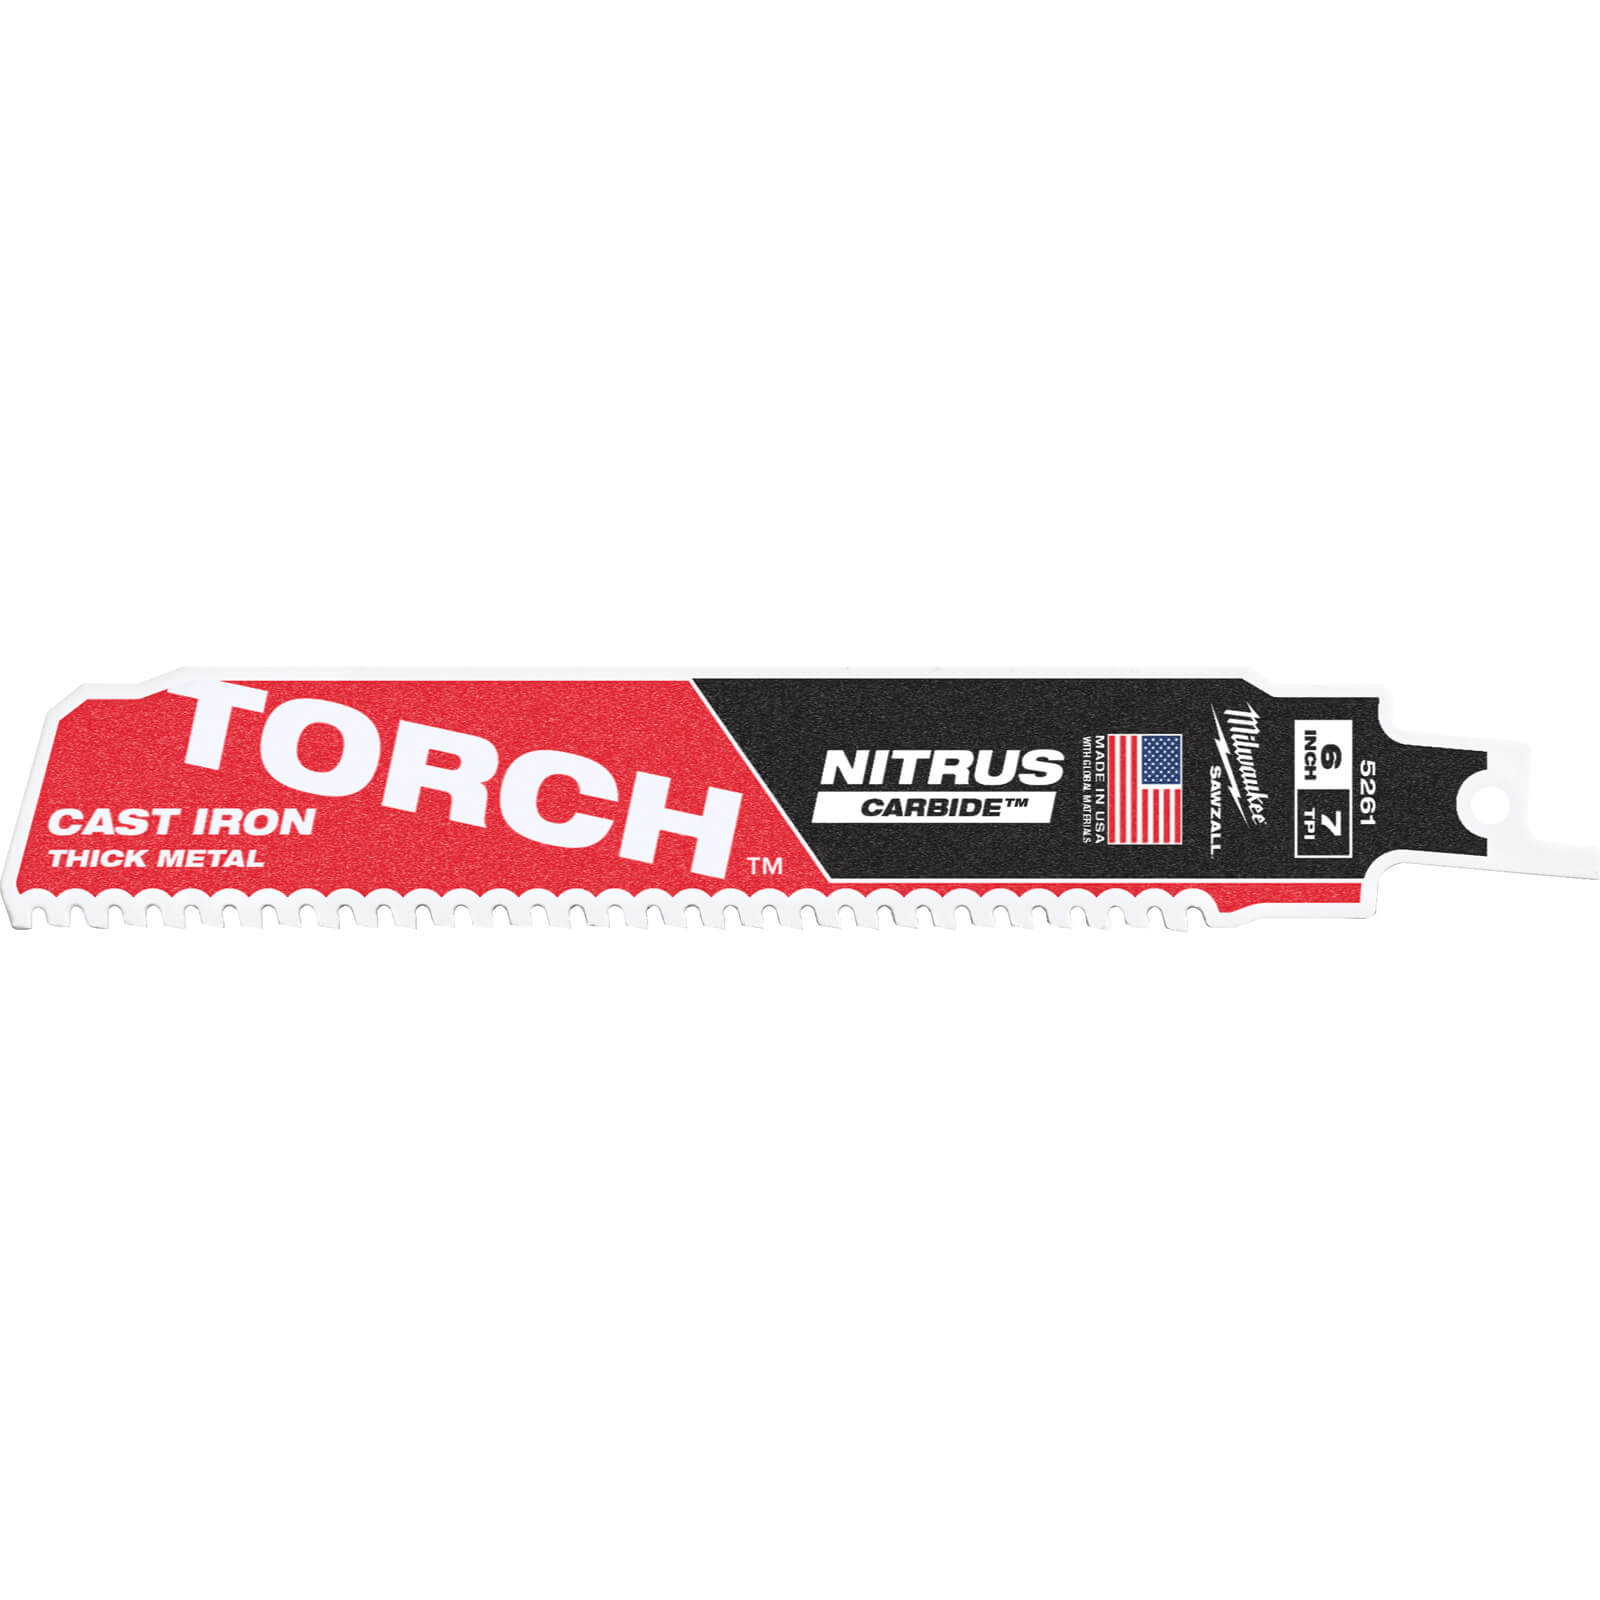 Milwaukee Heavy Duty TORCH Nitrus Carbide Reciprocating Sabre Saw Blades 150mm Pack of 1